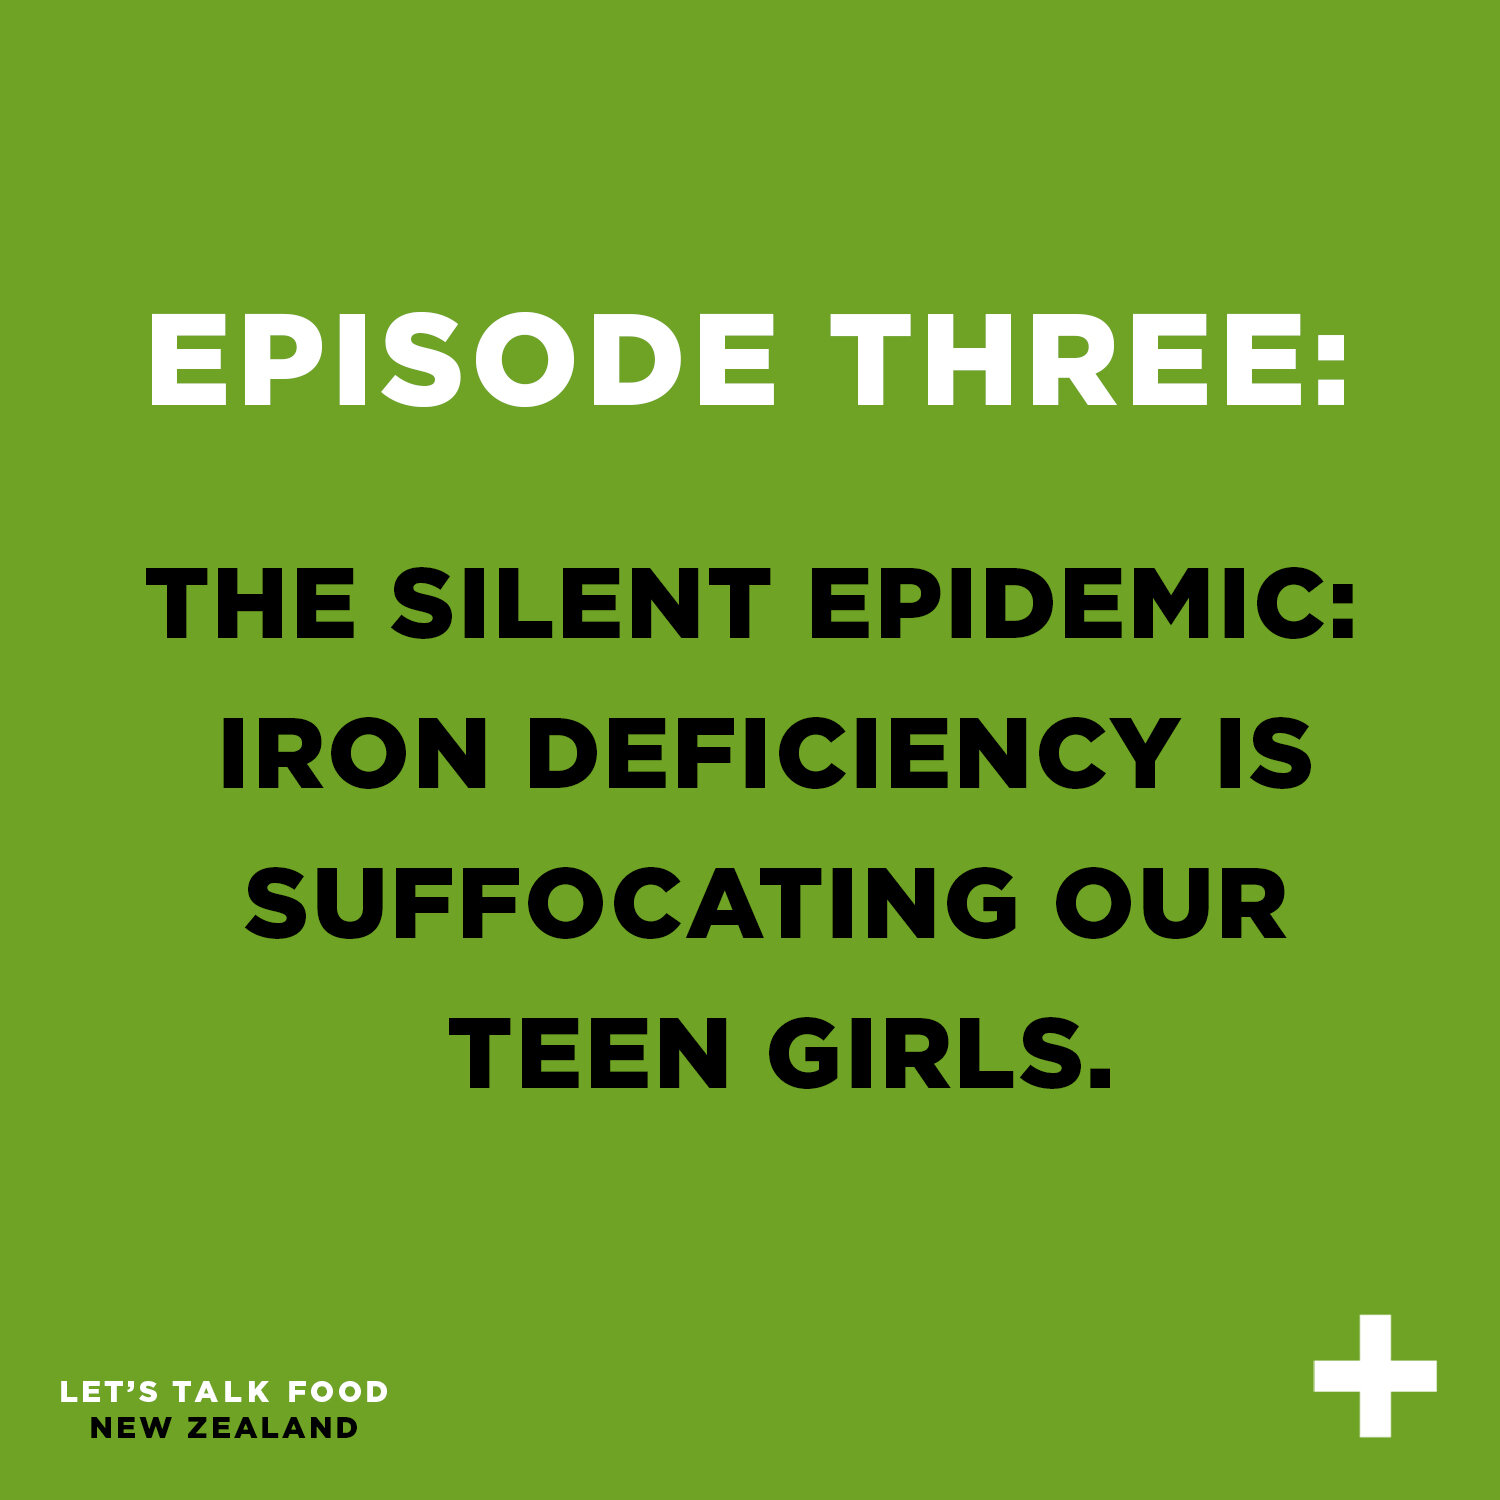 THE SILENT EPIDEMIC: IRON DEFICIENCY IS SUFFOCATING OUR TEEN GIRLS